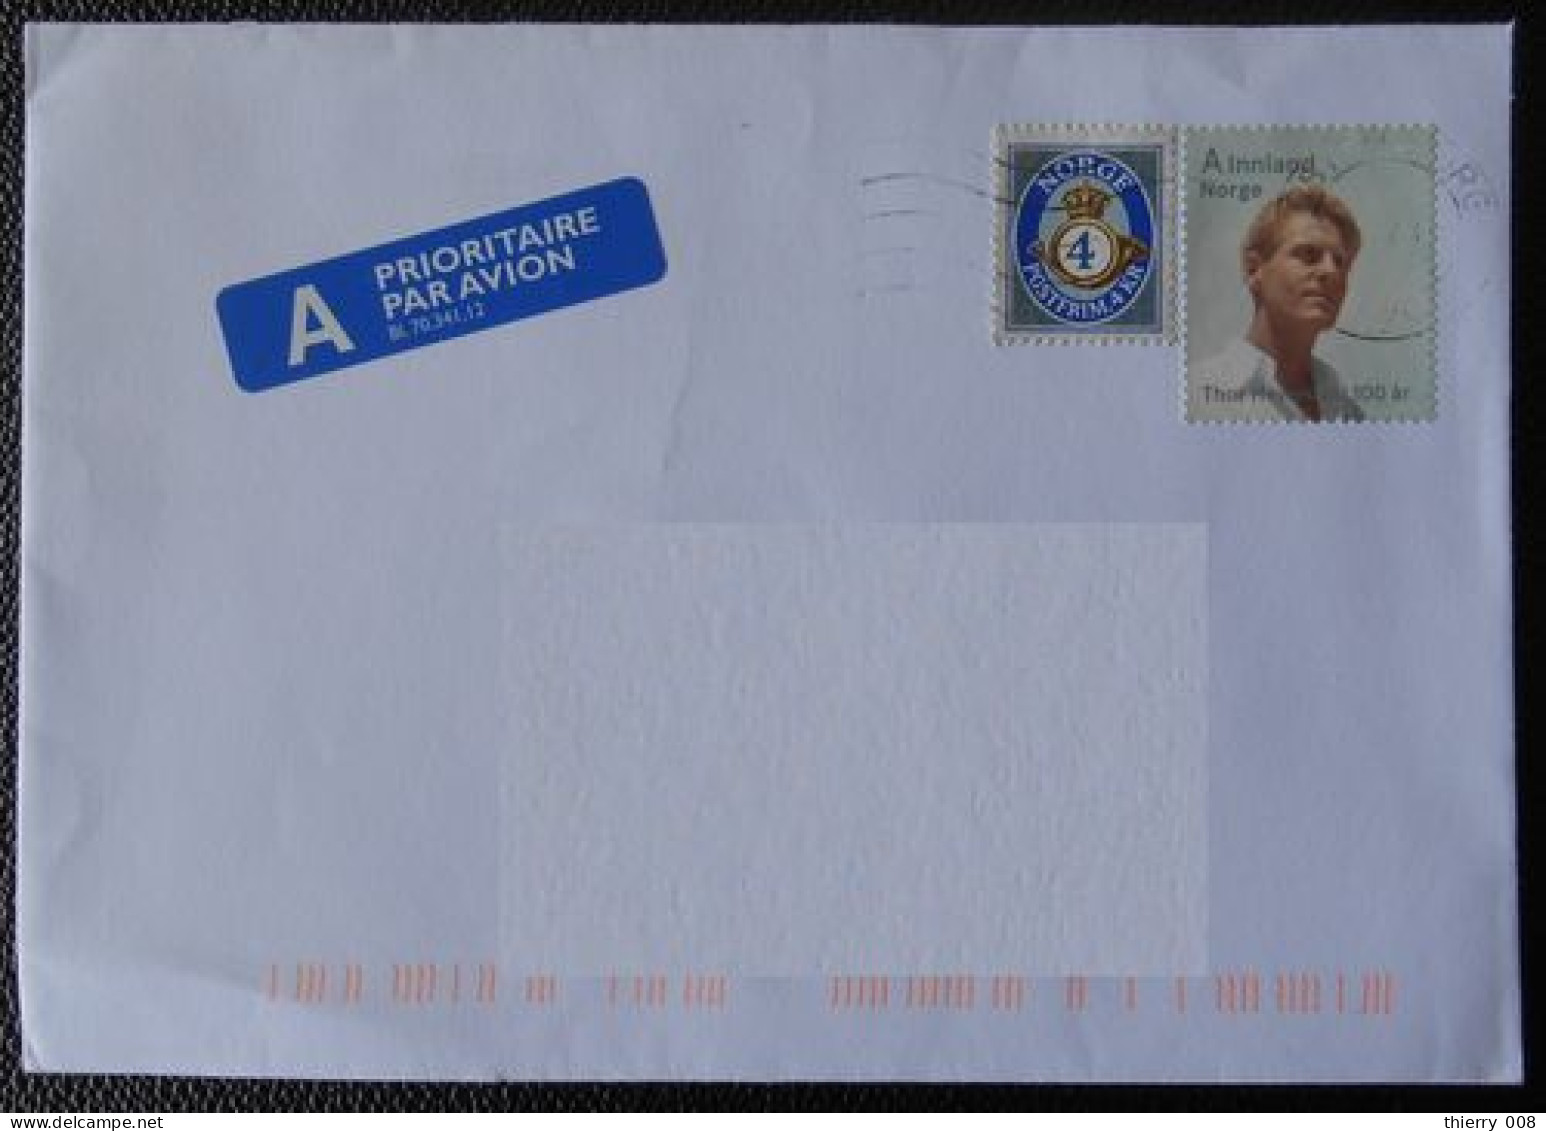 727  Norvège   Enveloppe Timbres Usage Courant Et Thor Heyerdahl - Covers & Documents